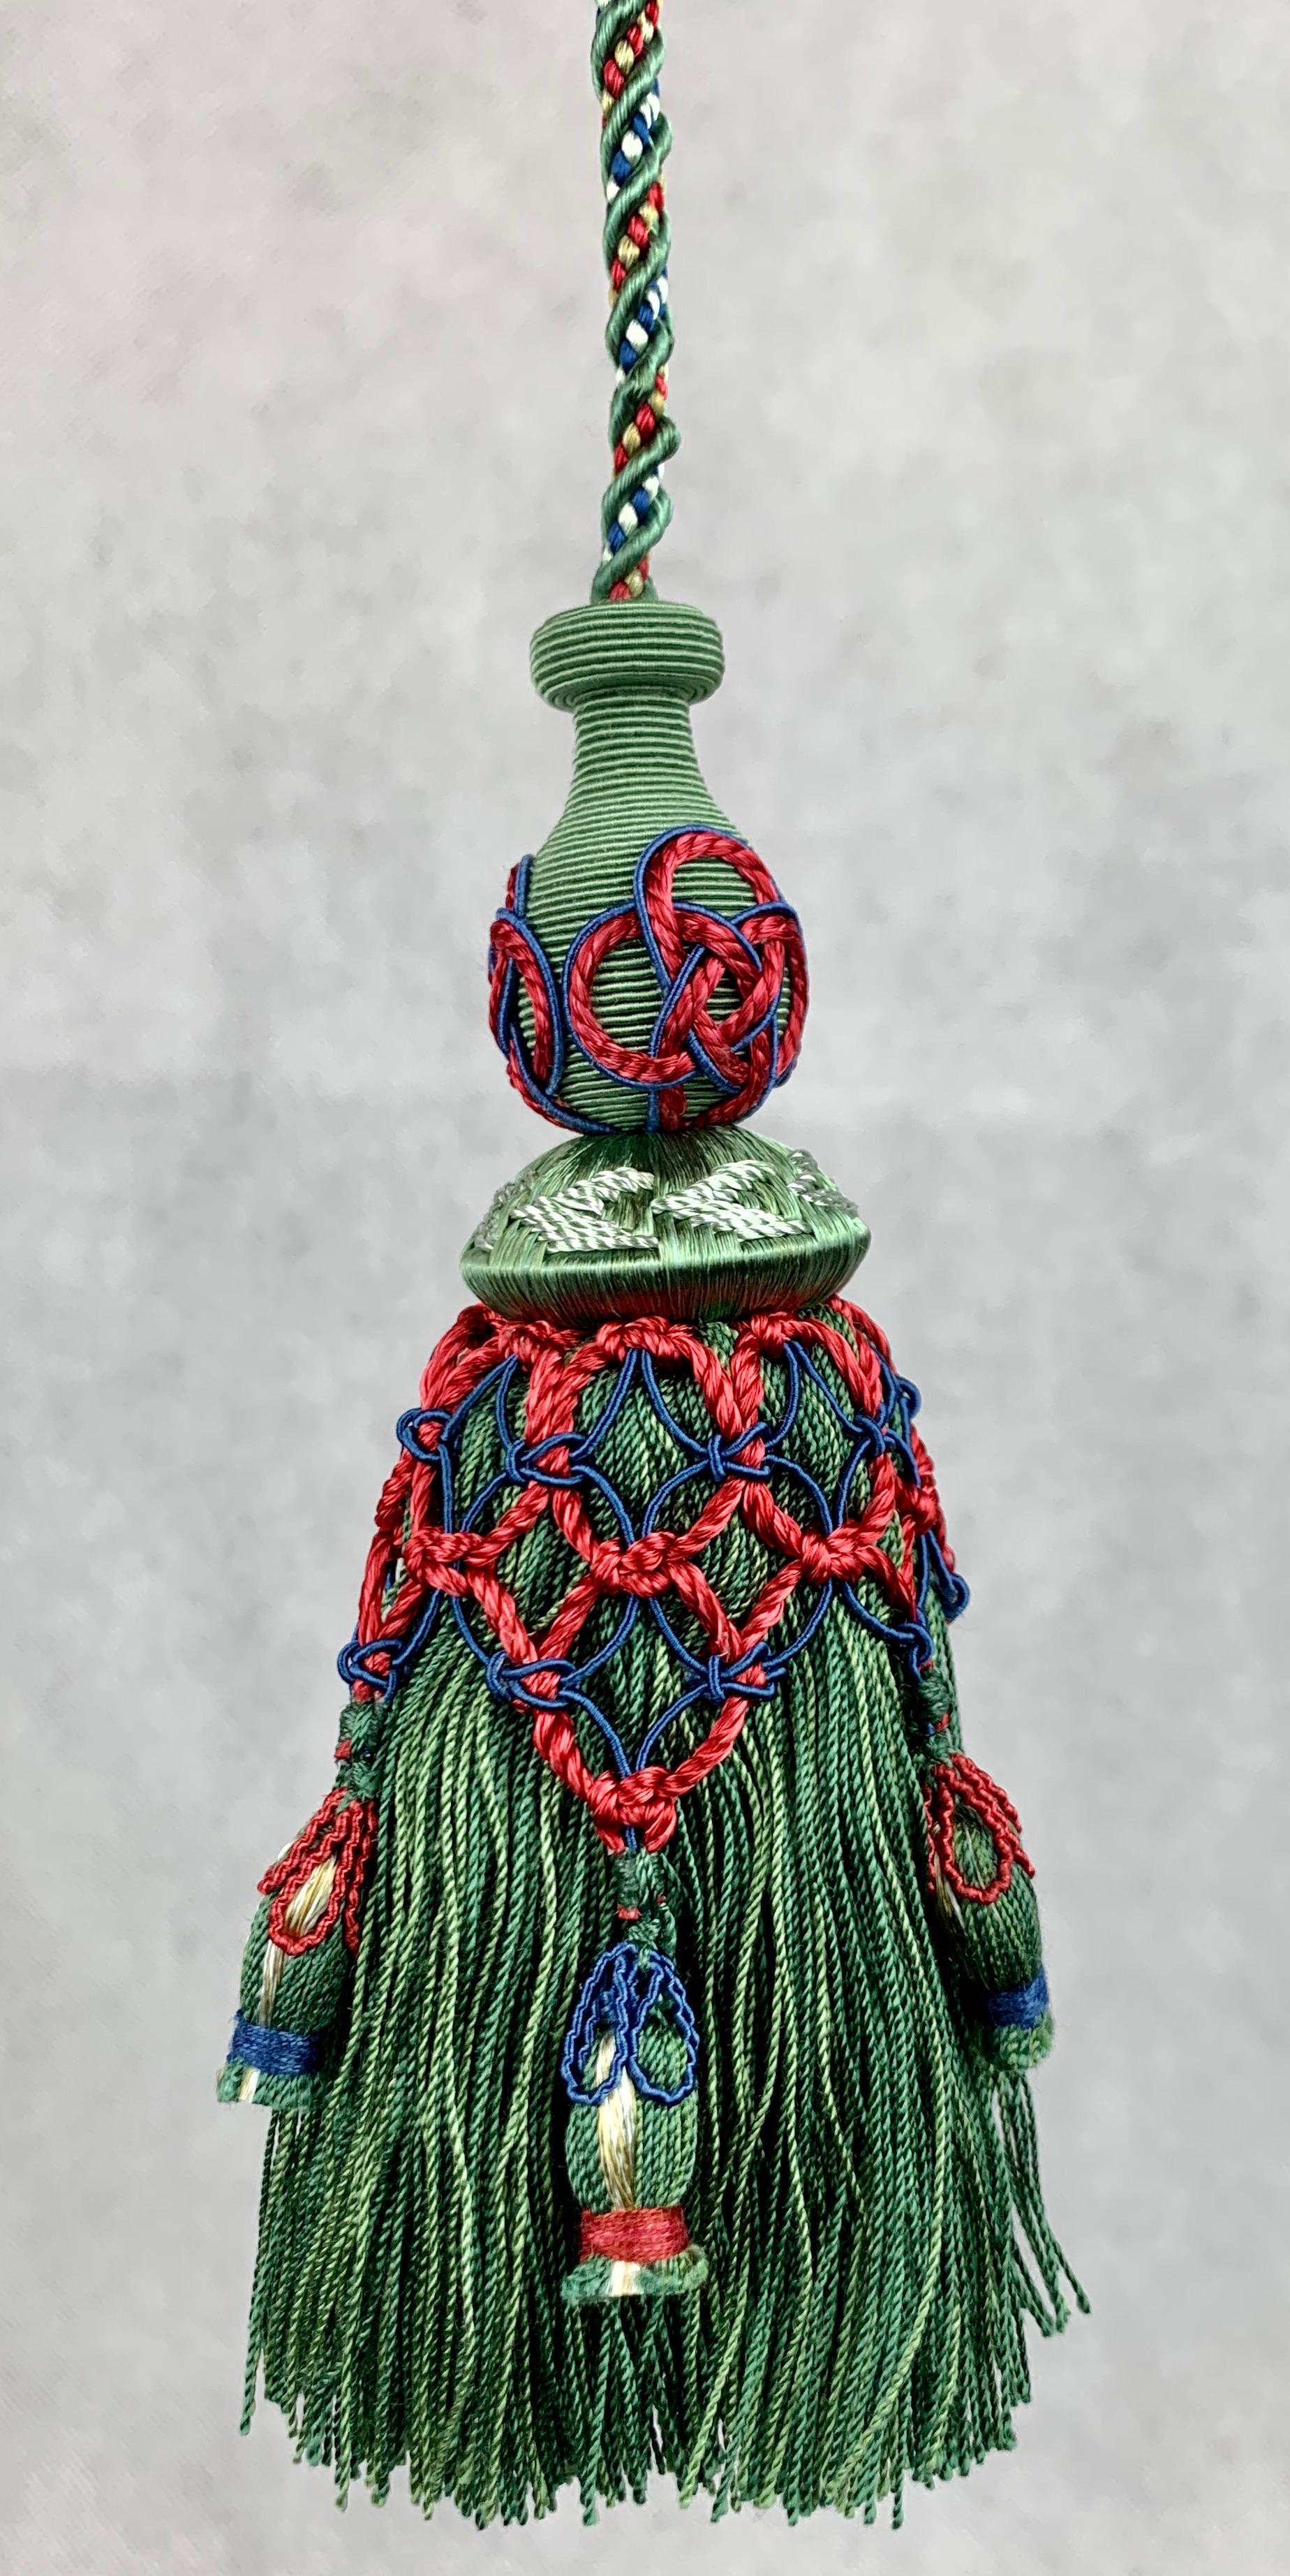 Hand-Knotted Houlés of Paris Key Tassel or Gland Cle in Verte-a Pair